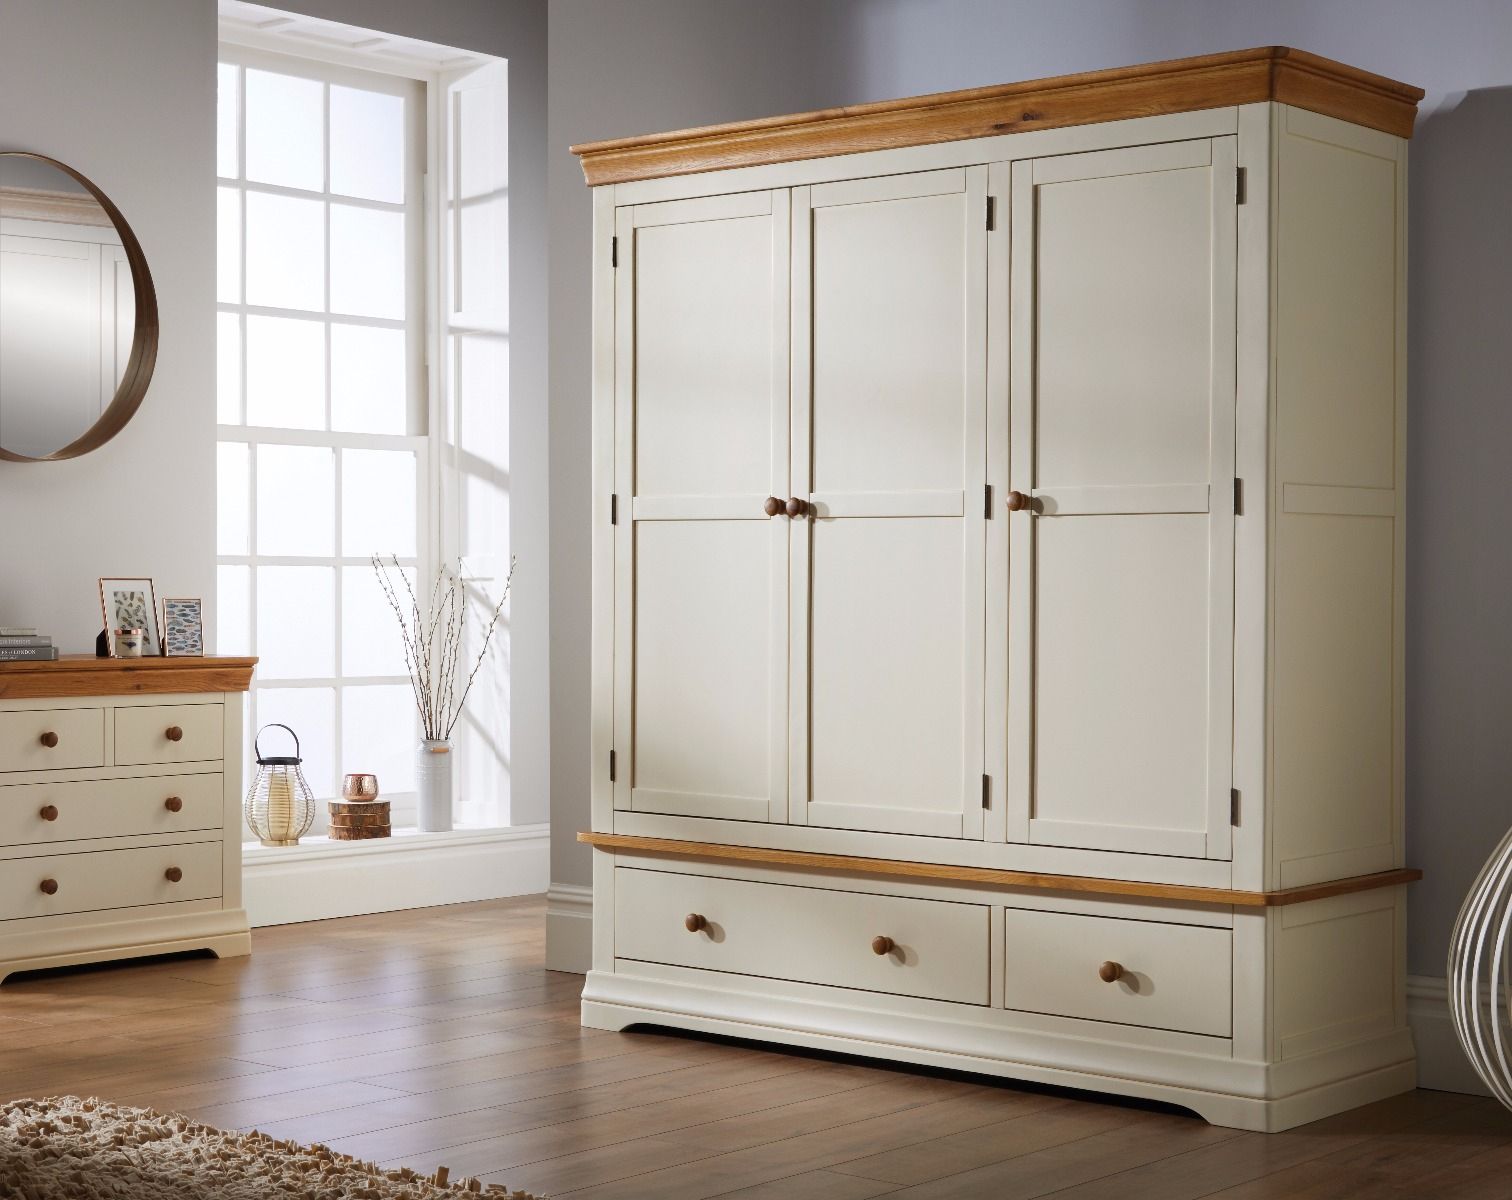 Farmhouse Cream Painted Triple Oak Wardrobe – Free Delivery | Top Furniture With Large Oak Wardrobes (View 14 of 15)